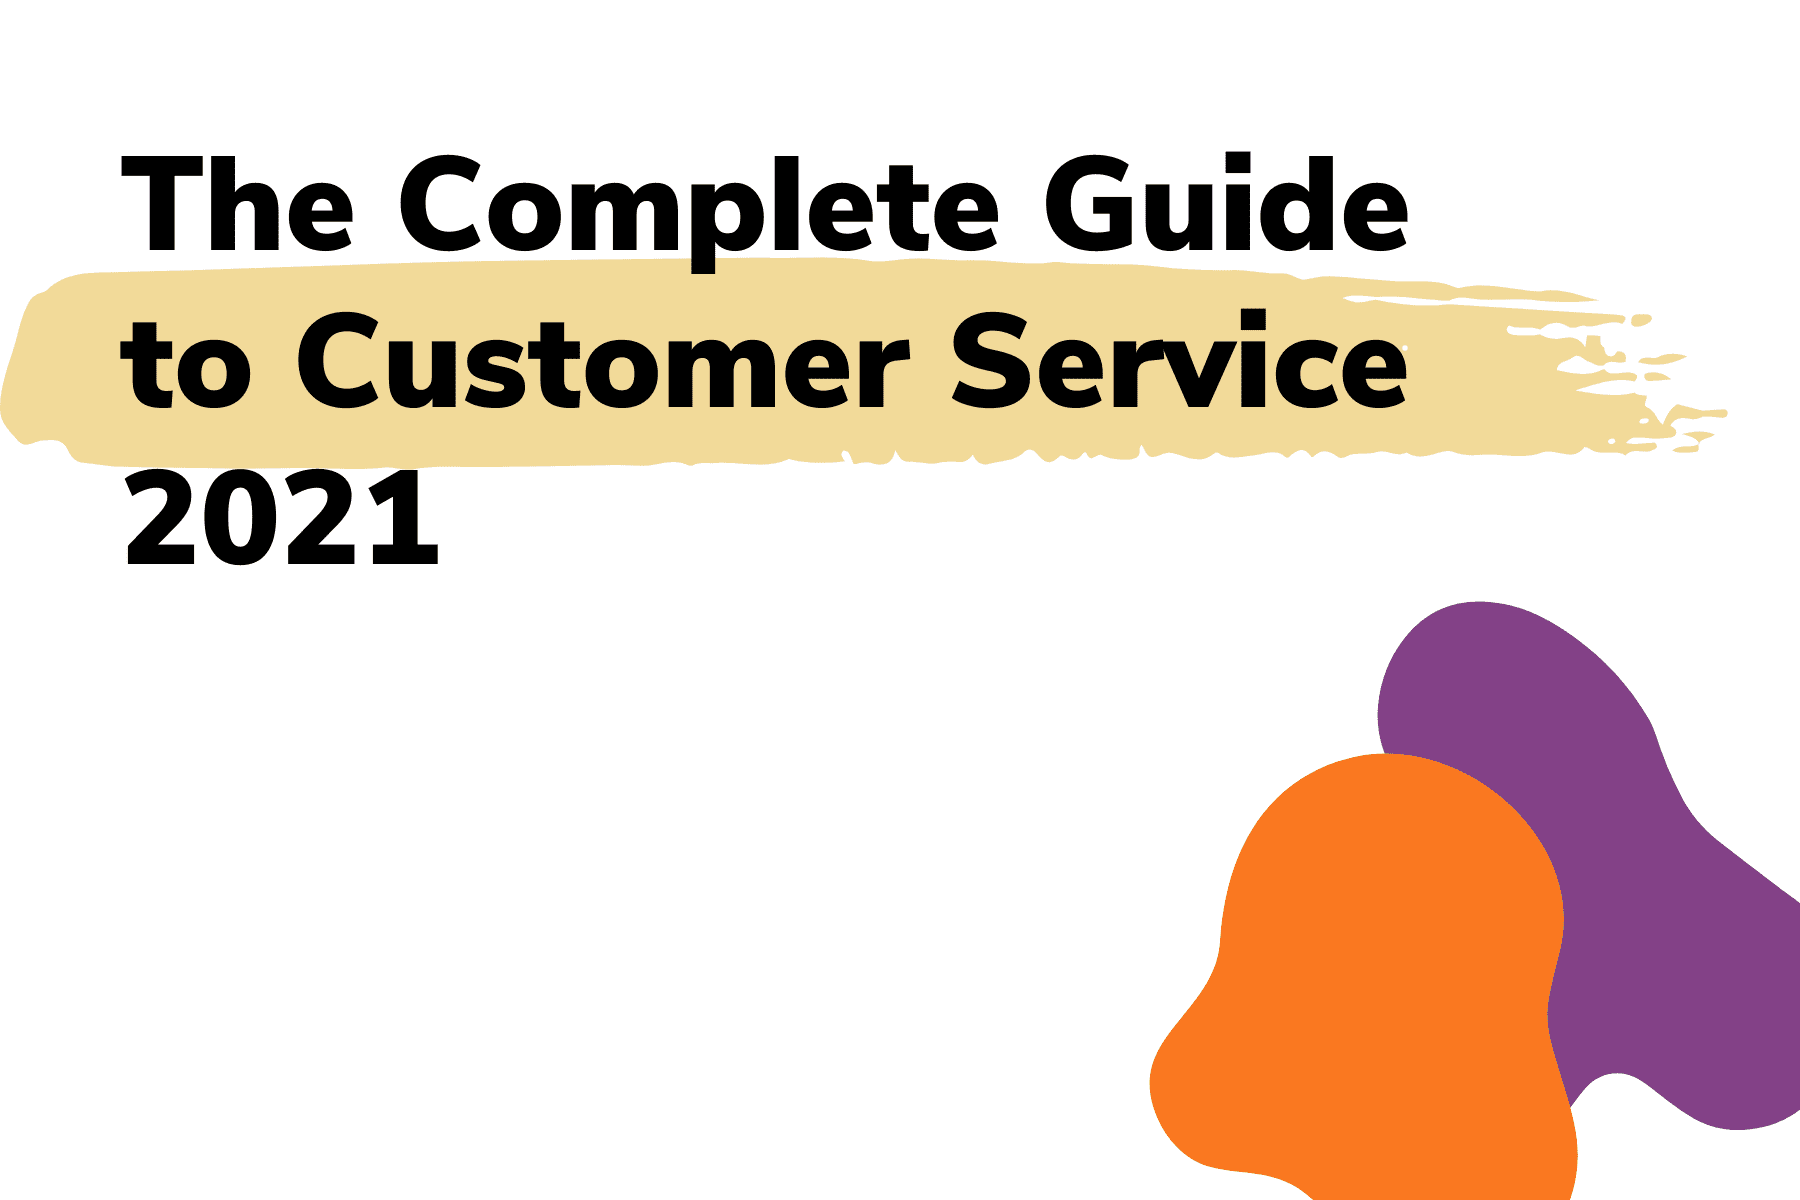 The complete guide to digital customer service